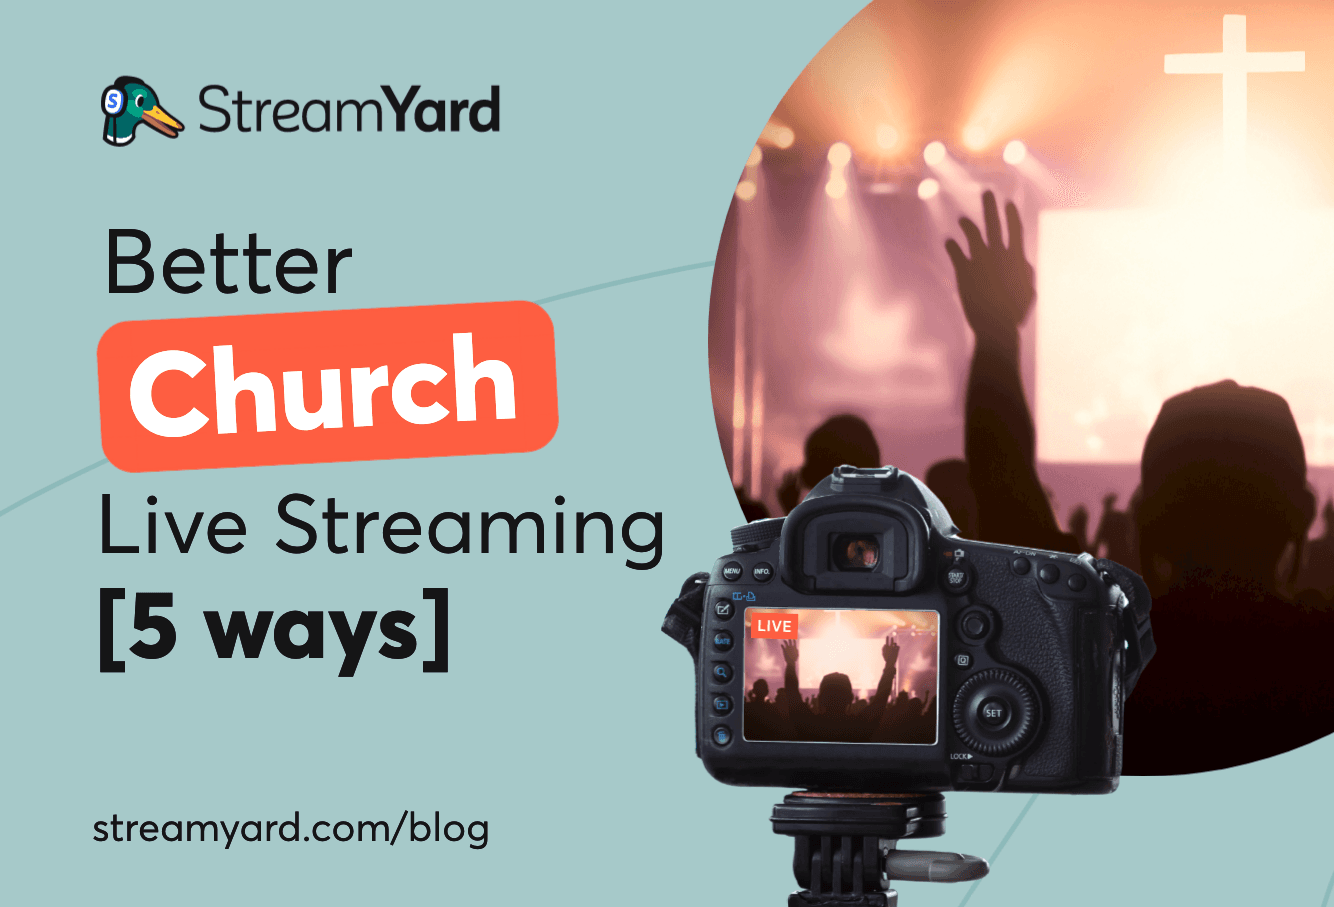 Tap into the world of better church live streaming. Here’s a list of ways to expand your church live streams’ reach and impact to your congregation.